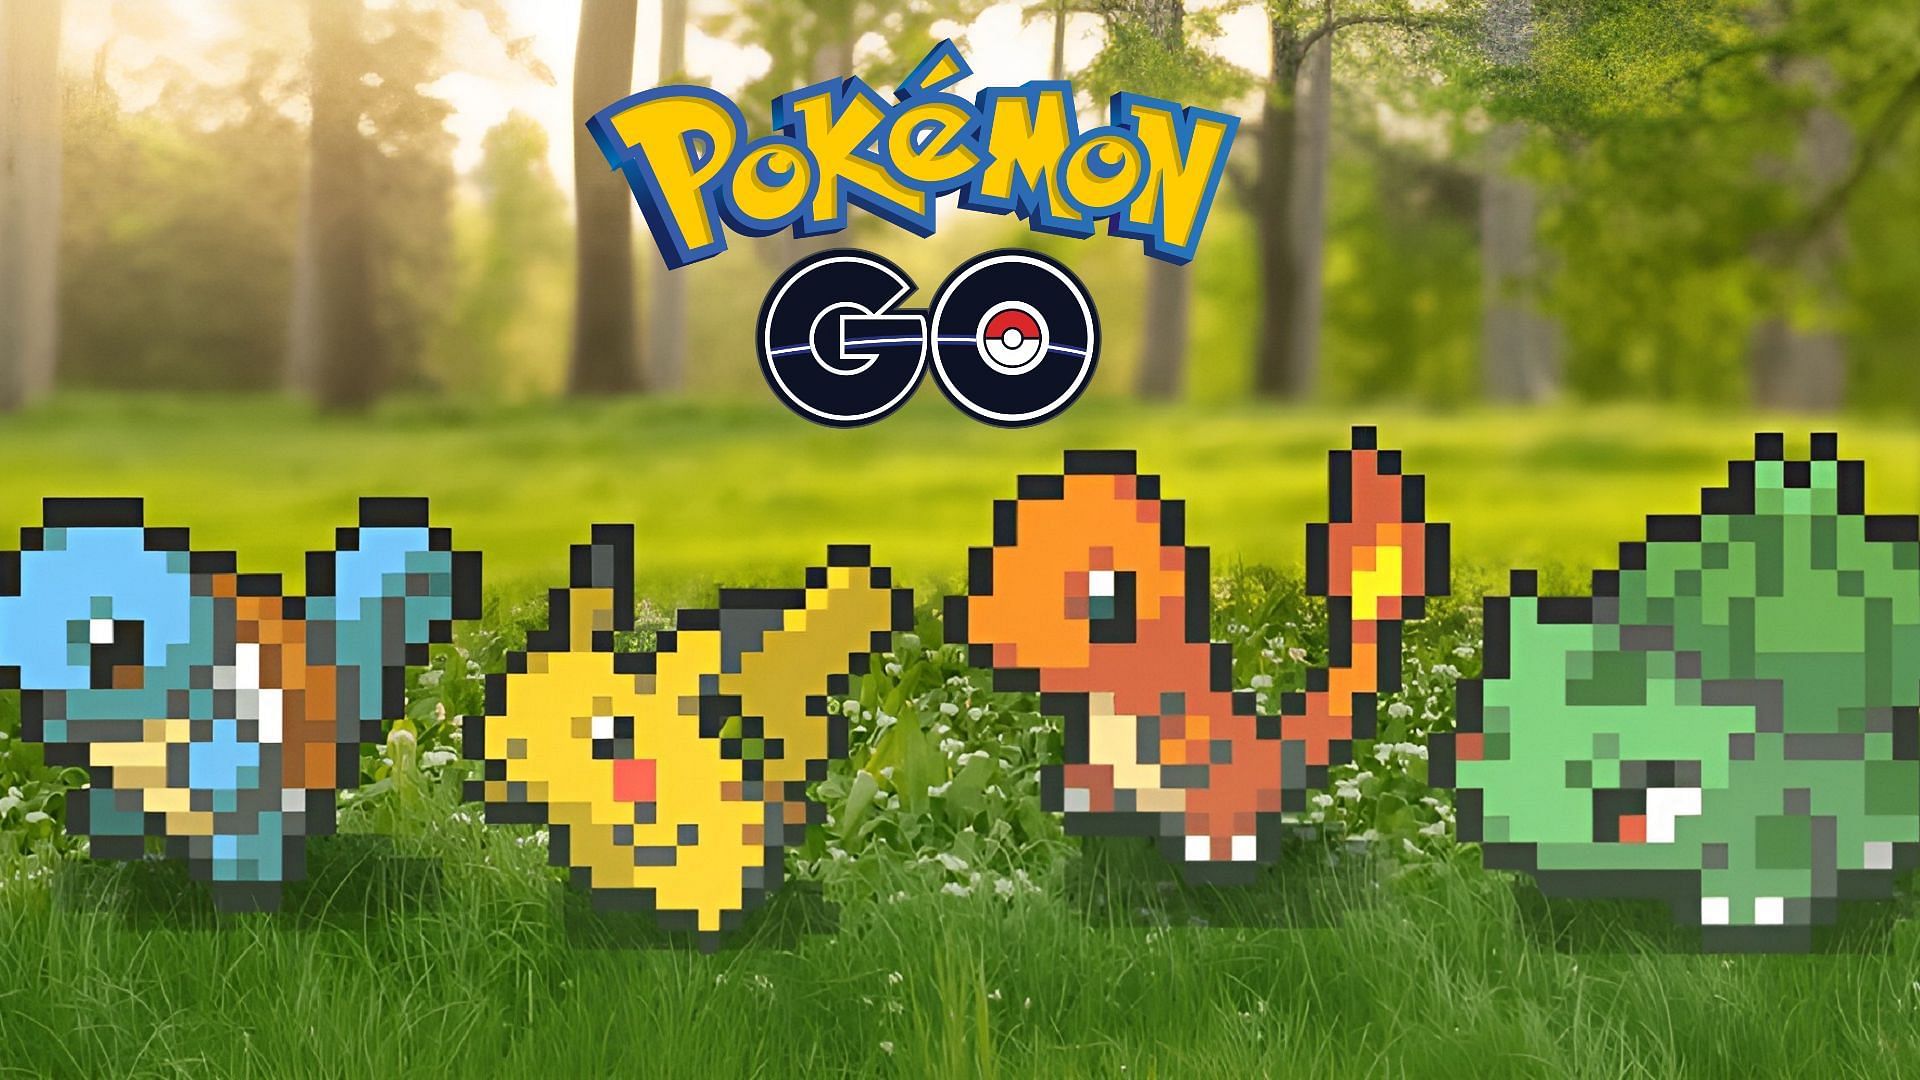 5 event features that should be permanent in Pokemon GO, according to Reddit